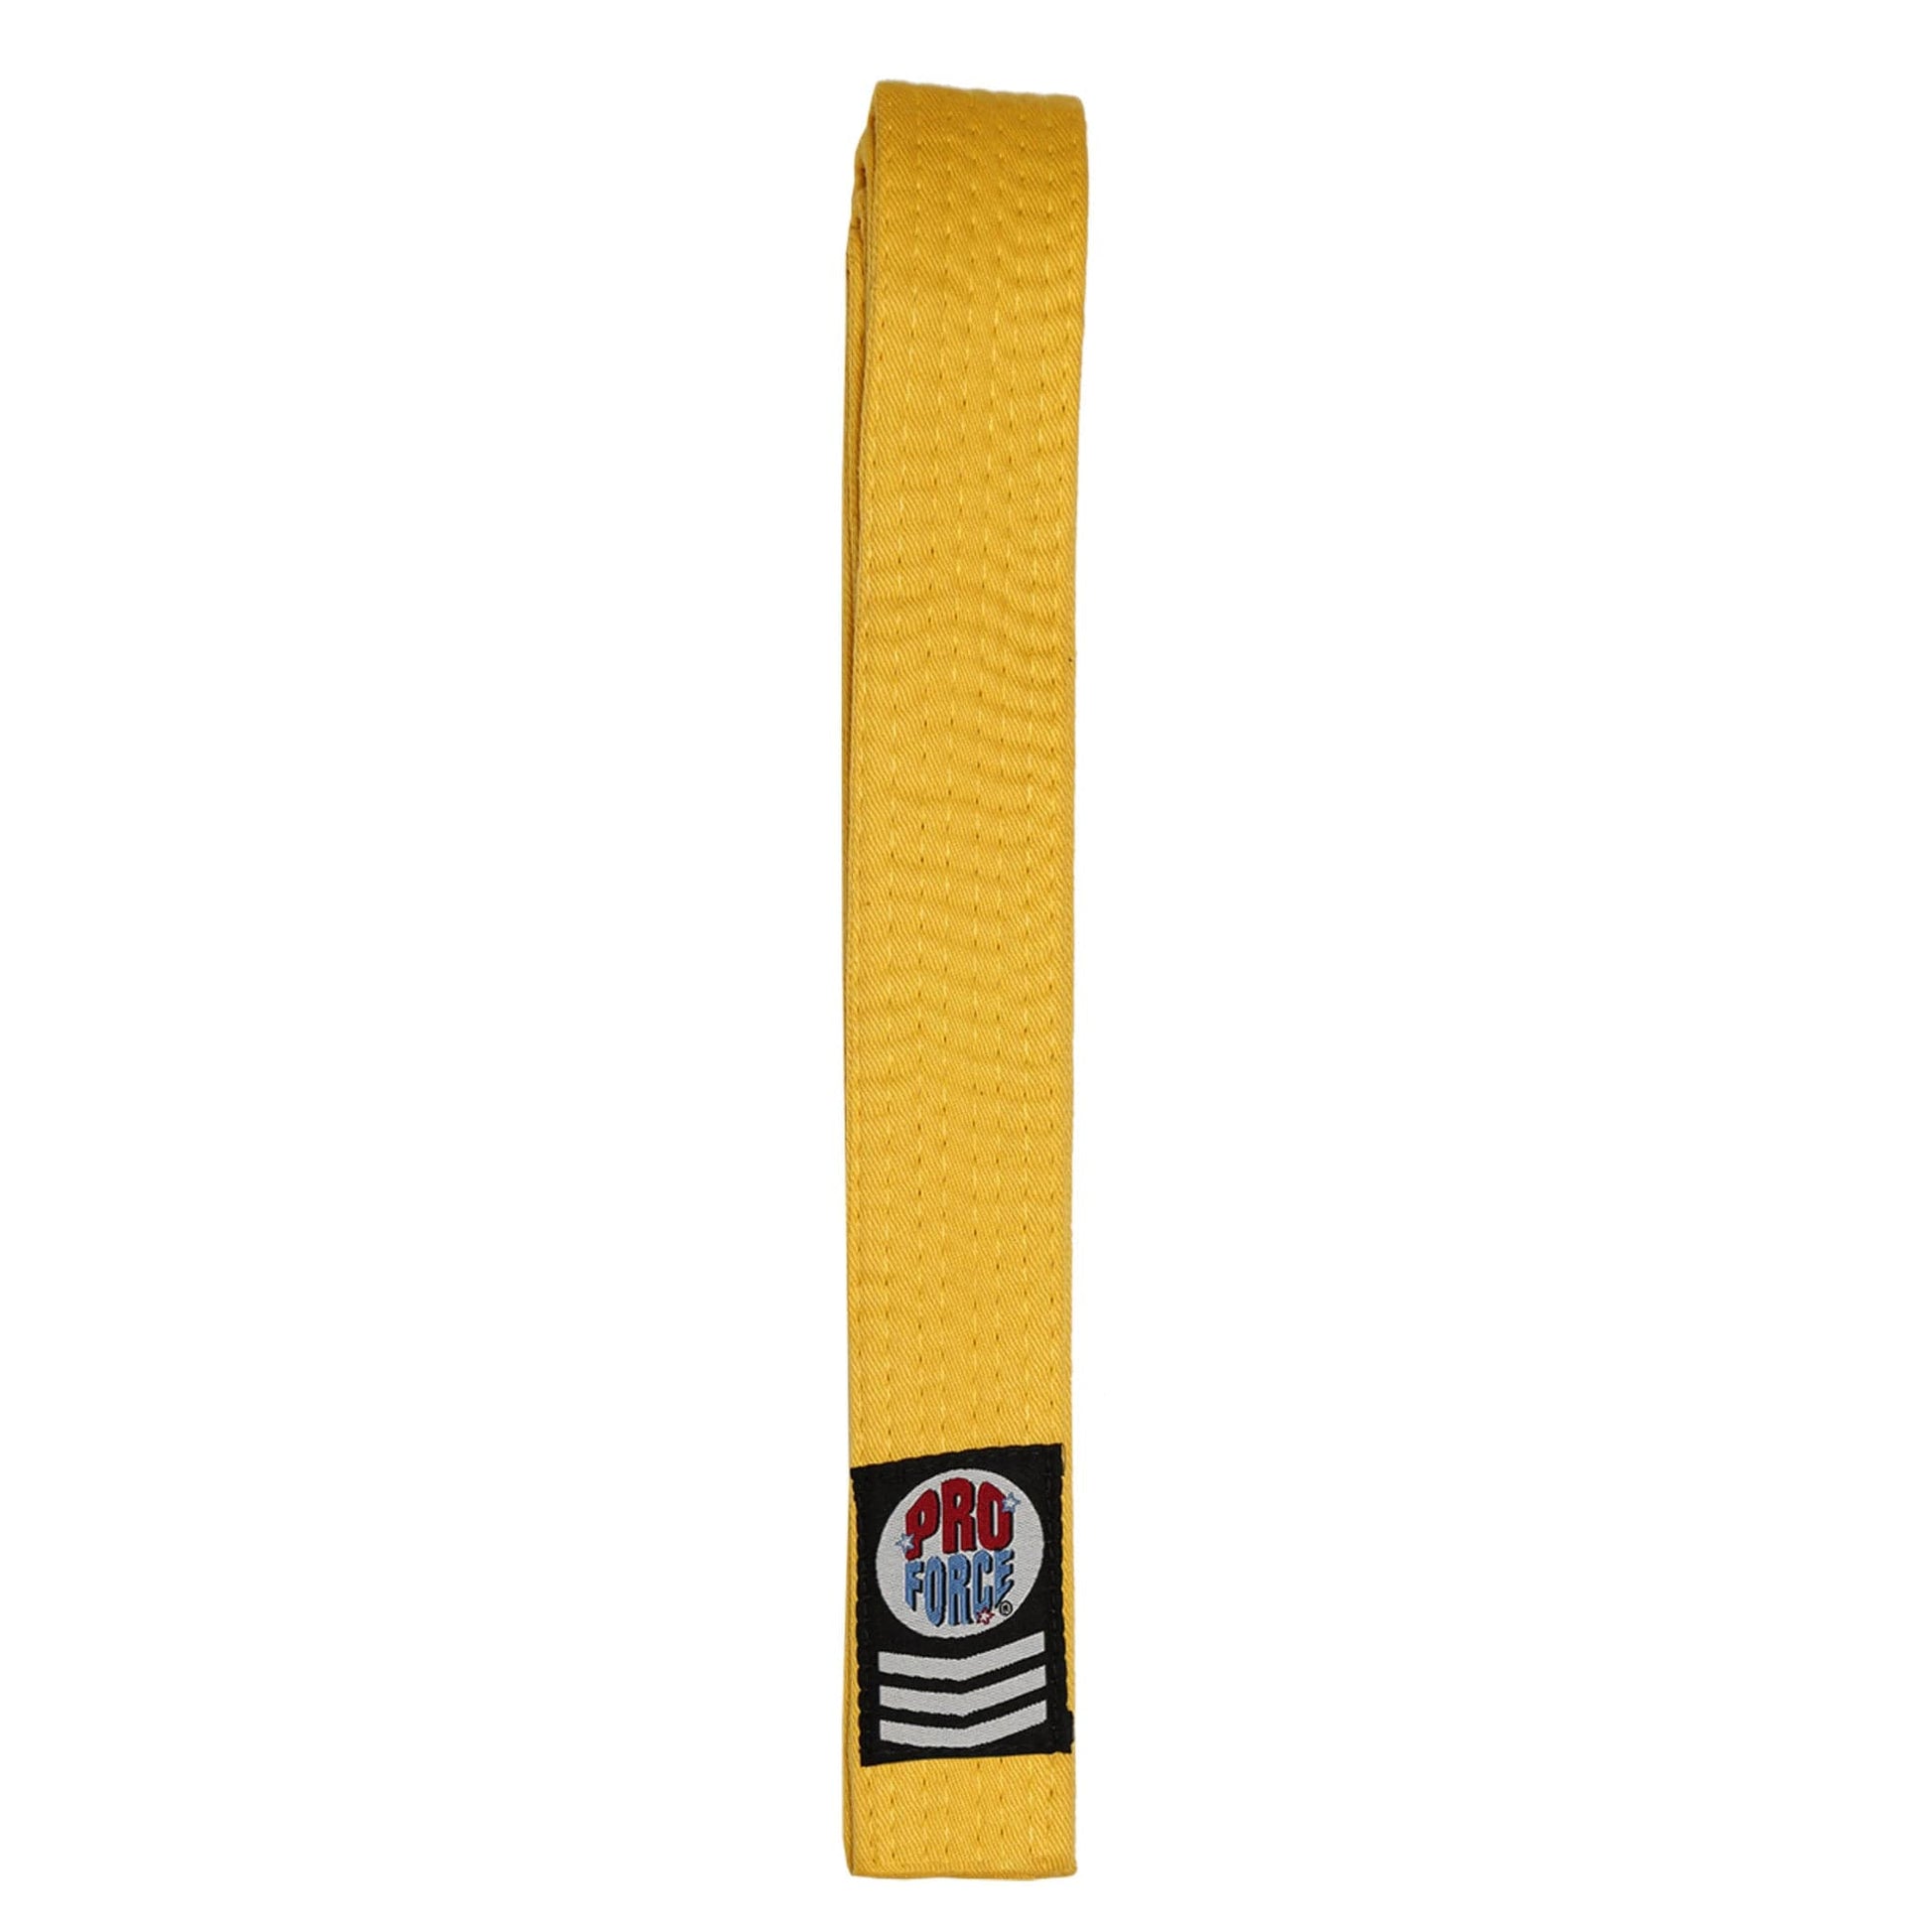 EclipseMartialArtsSupplies sporting goods Yellow / 0 child small ProForce Gladiator 1.75 inch wide Double Wrap Karate Belts